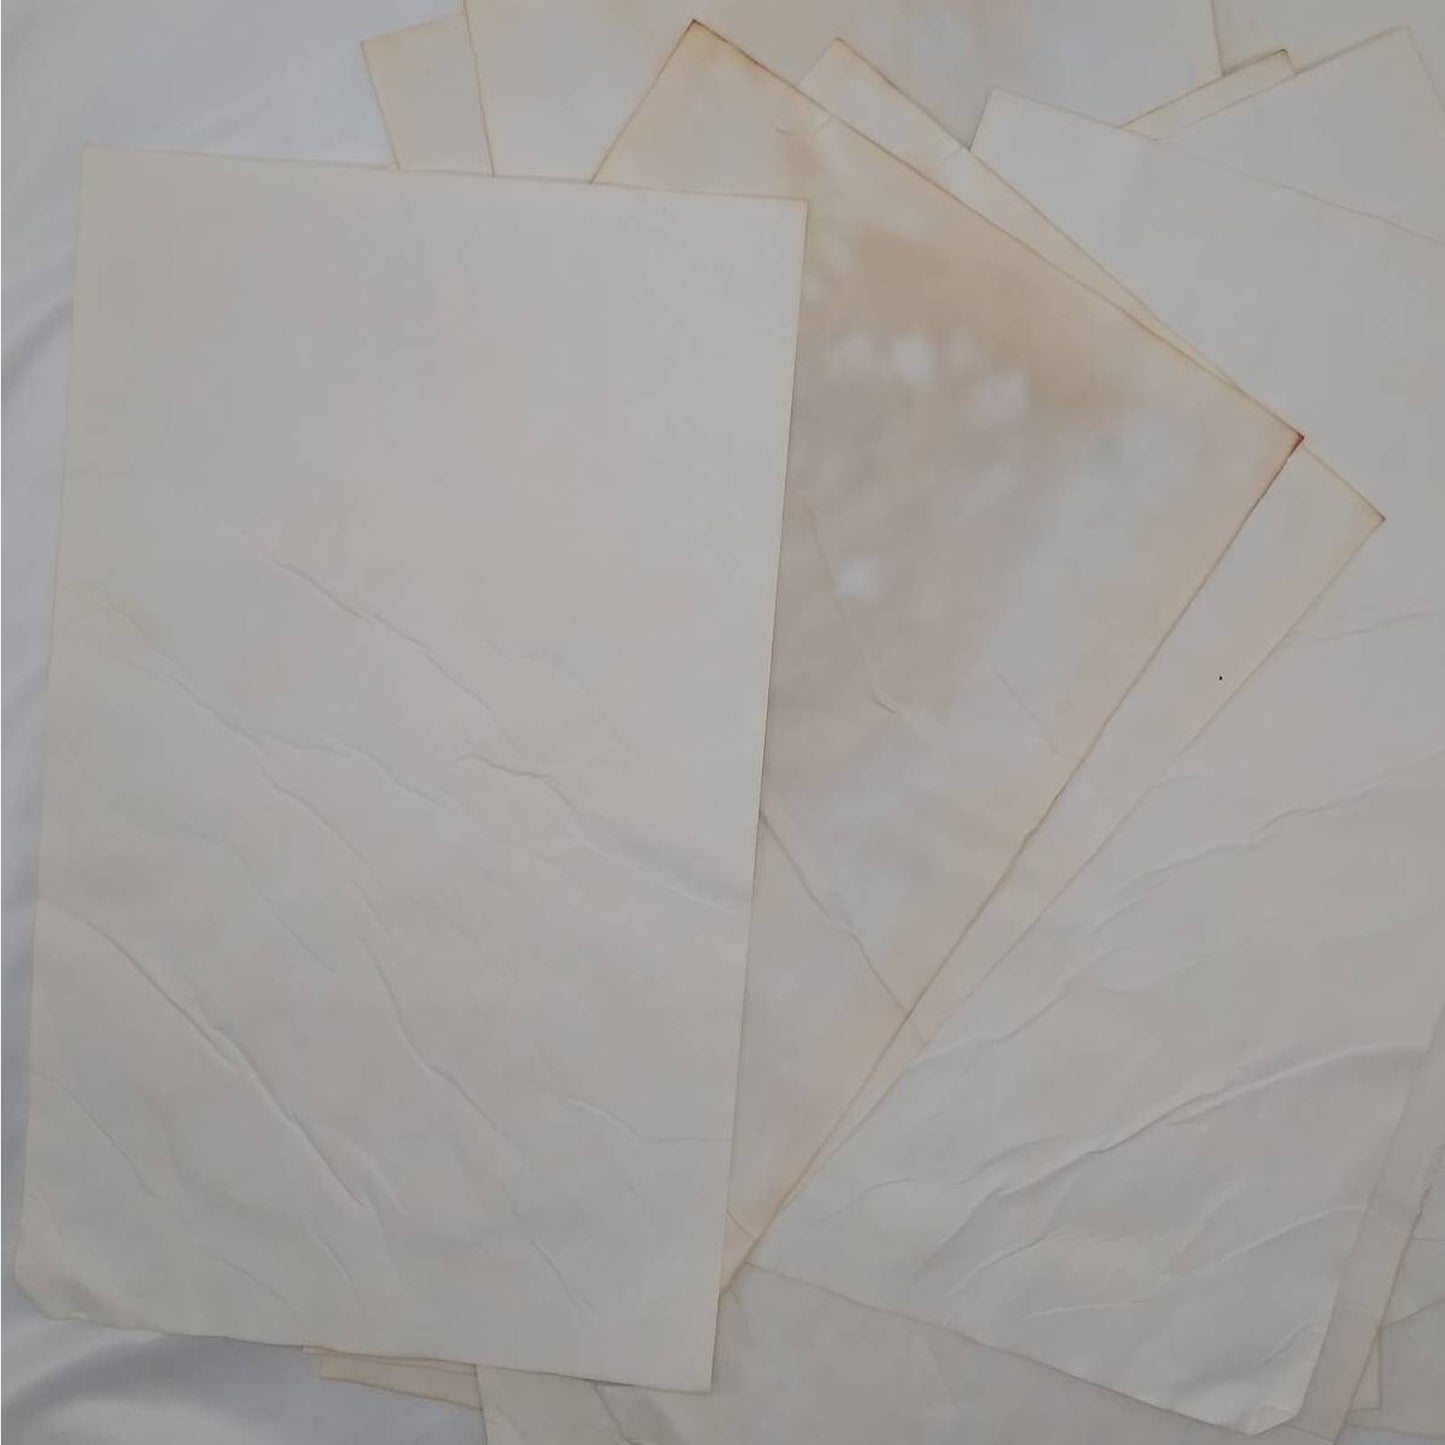 20 Beige Cabbage Dyed 8.5"x14" Papers, Hand Dyed Papers, Junk Journal Supply